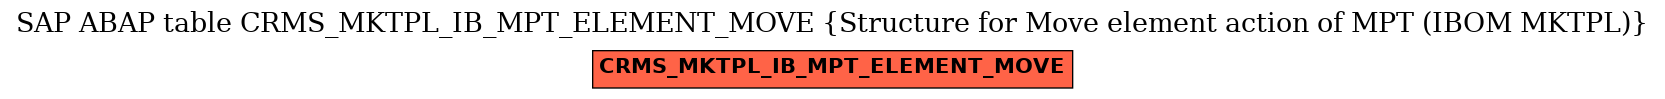 E-R Diagram for table CRMS_MKTPL_IB_MPT_ELEMENT_MOVE (Structure for Move element action of MPT (IBOM MKTPL))